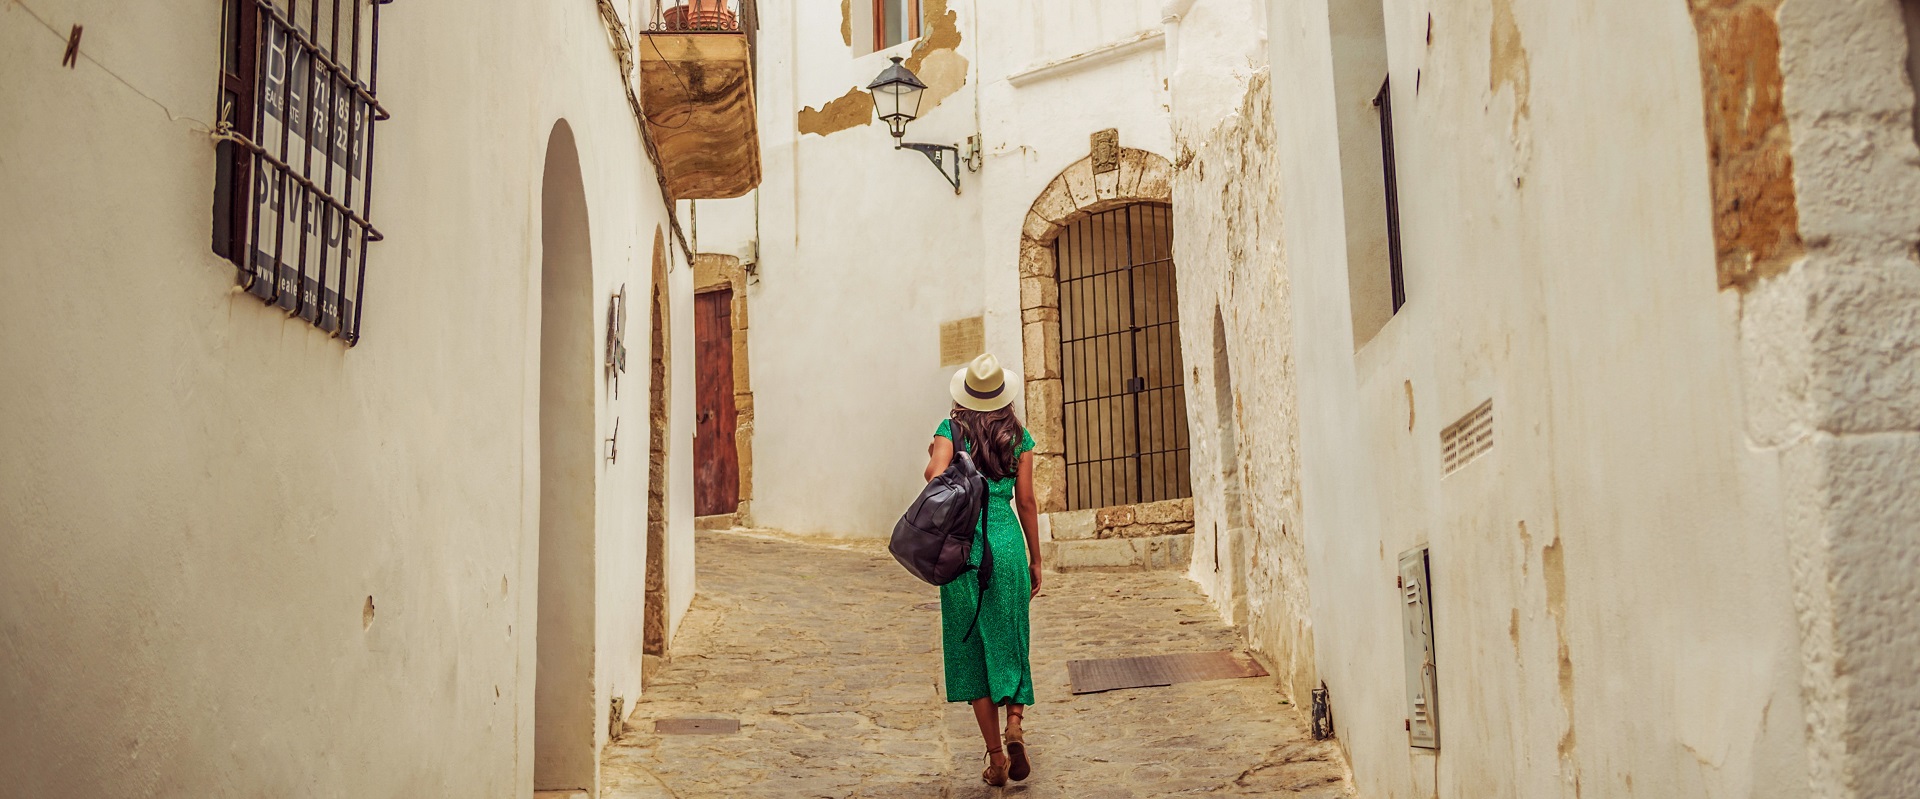 Exploring the streets of Spain. Image: iStock